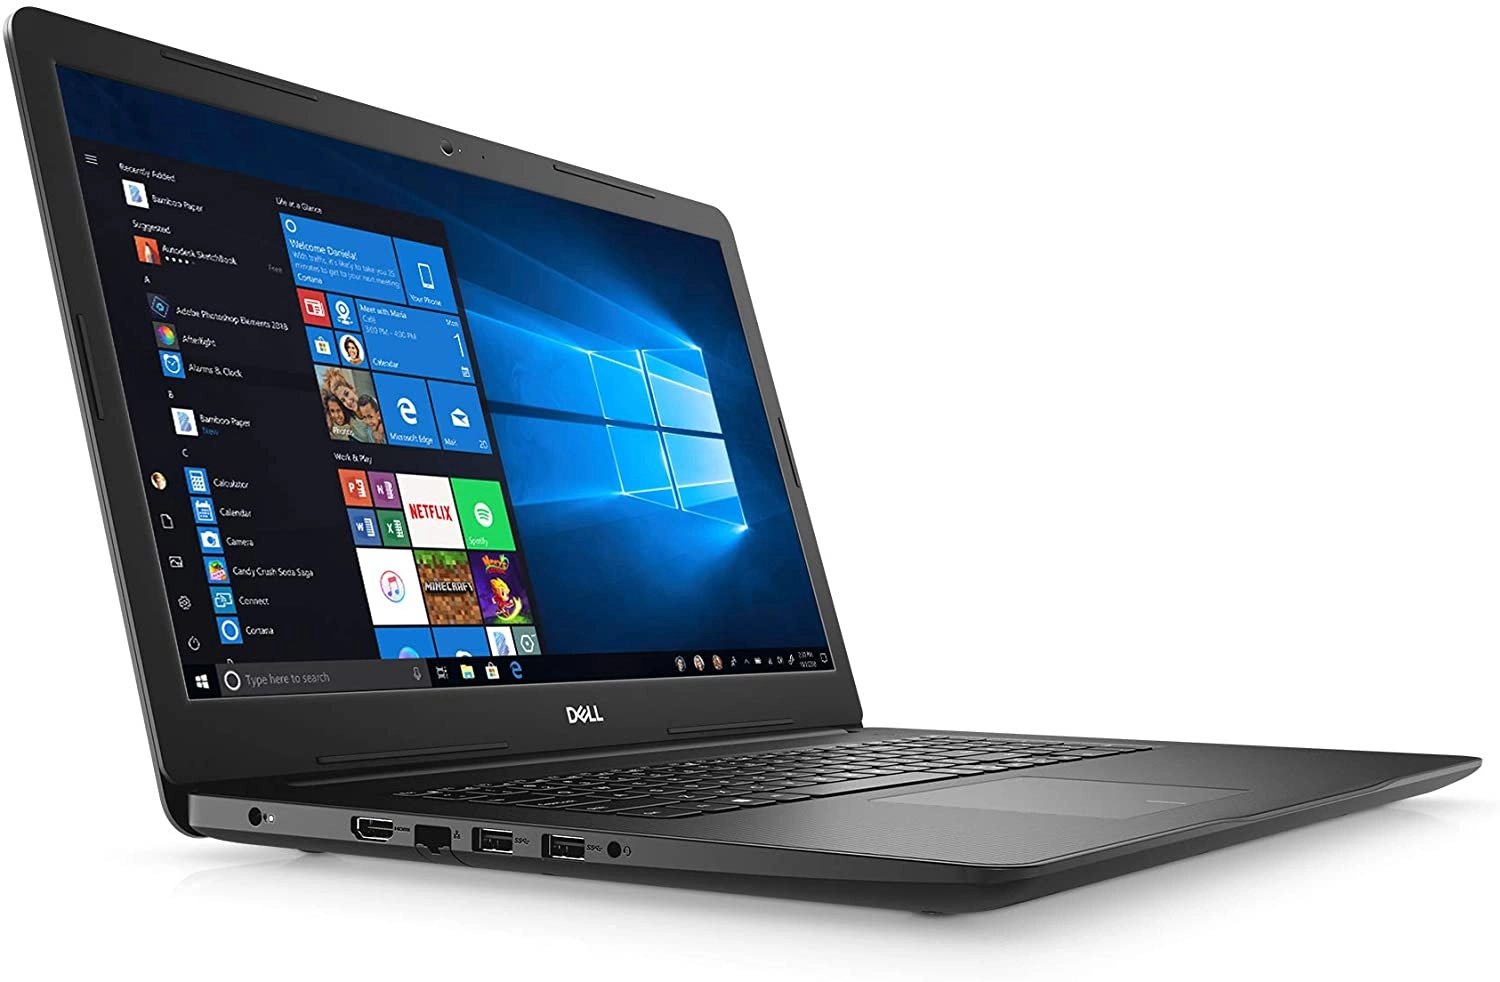 Dell Inspiron 17 3793 laptop image